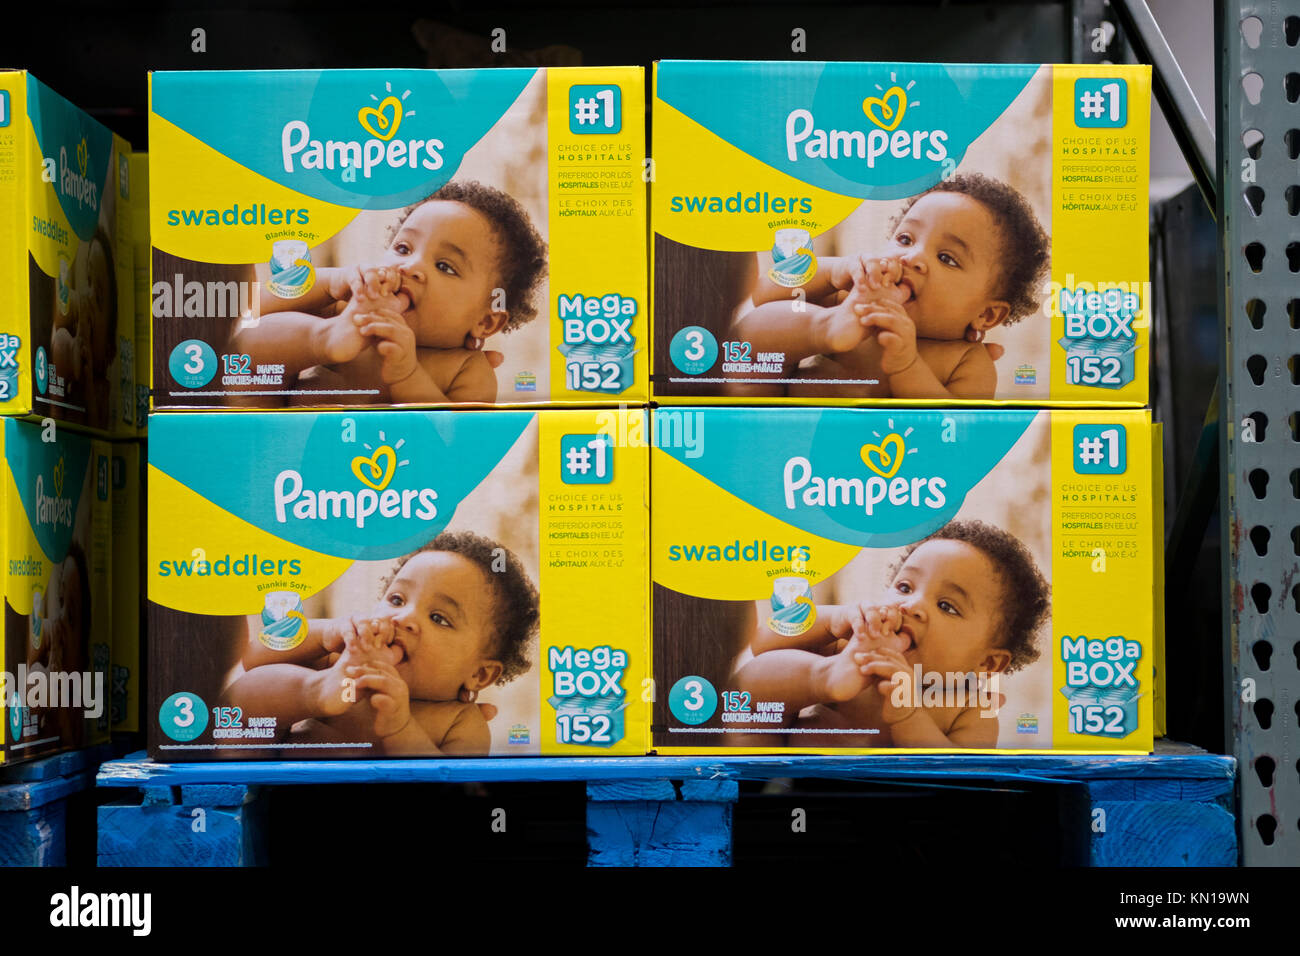 Mega boxes of Pampers baby diapers for sale at BJ's Wholesale Club in Whitestone, Queens, New York. Stock Photo